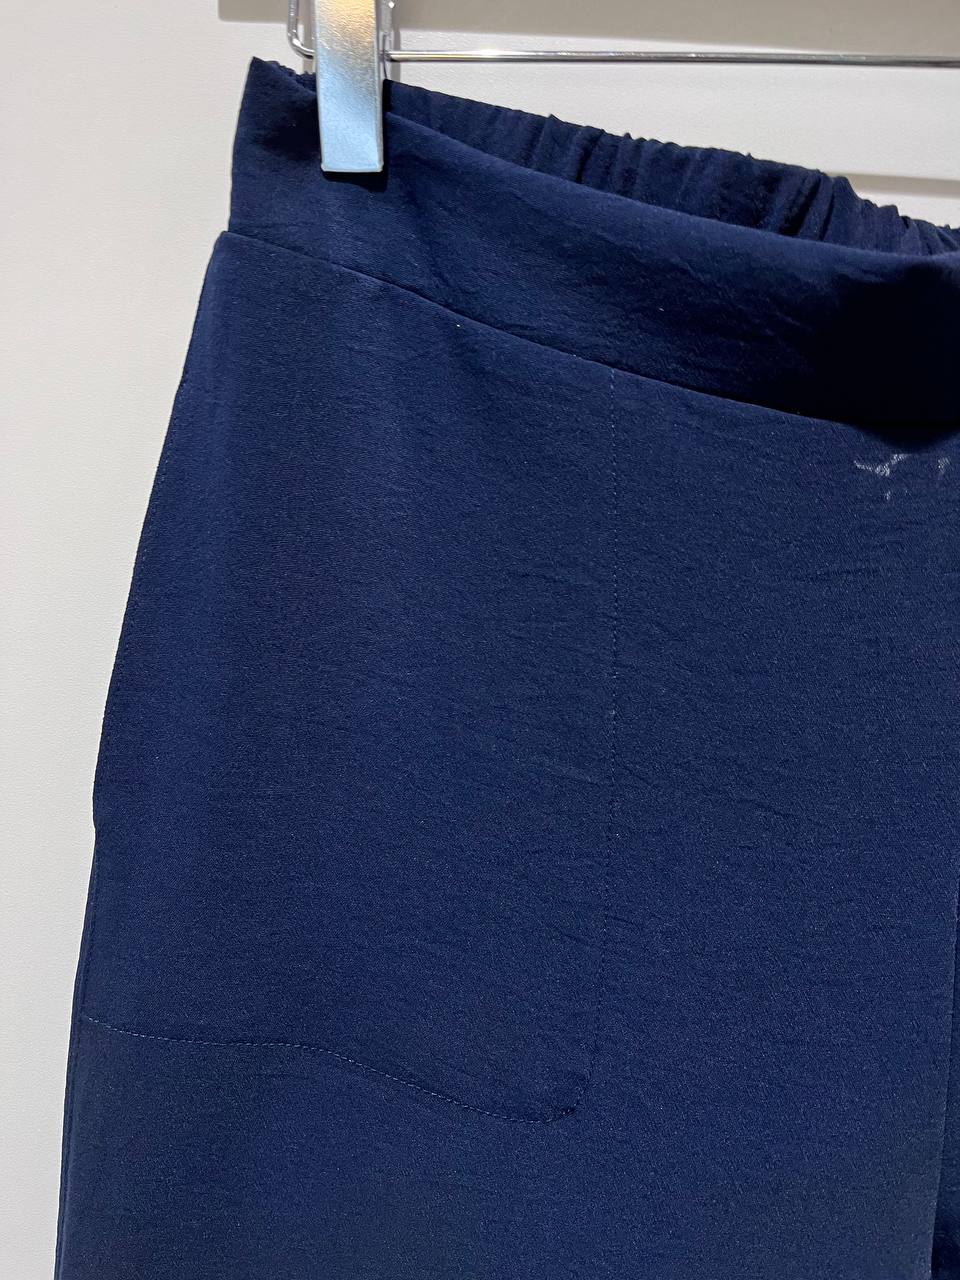 Inco Back Trousers